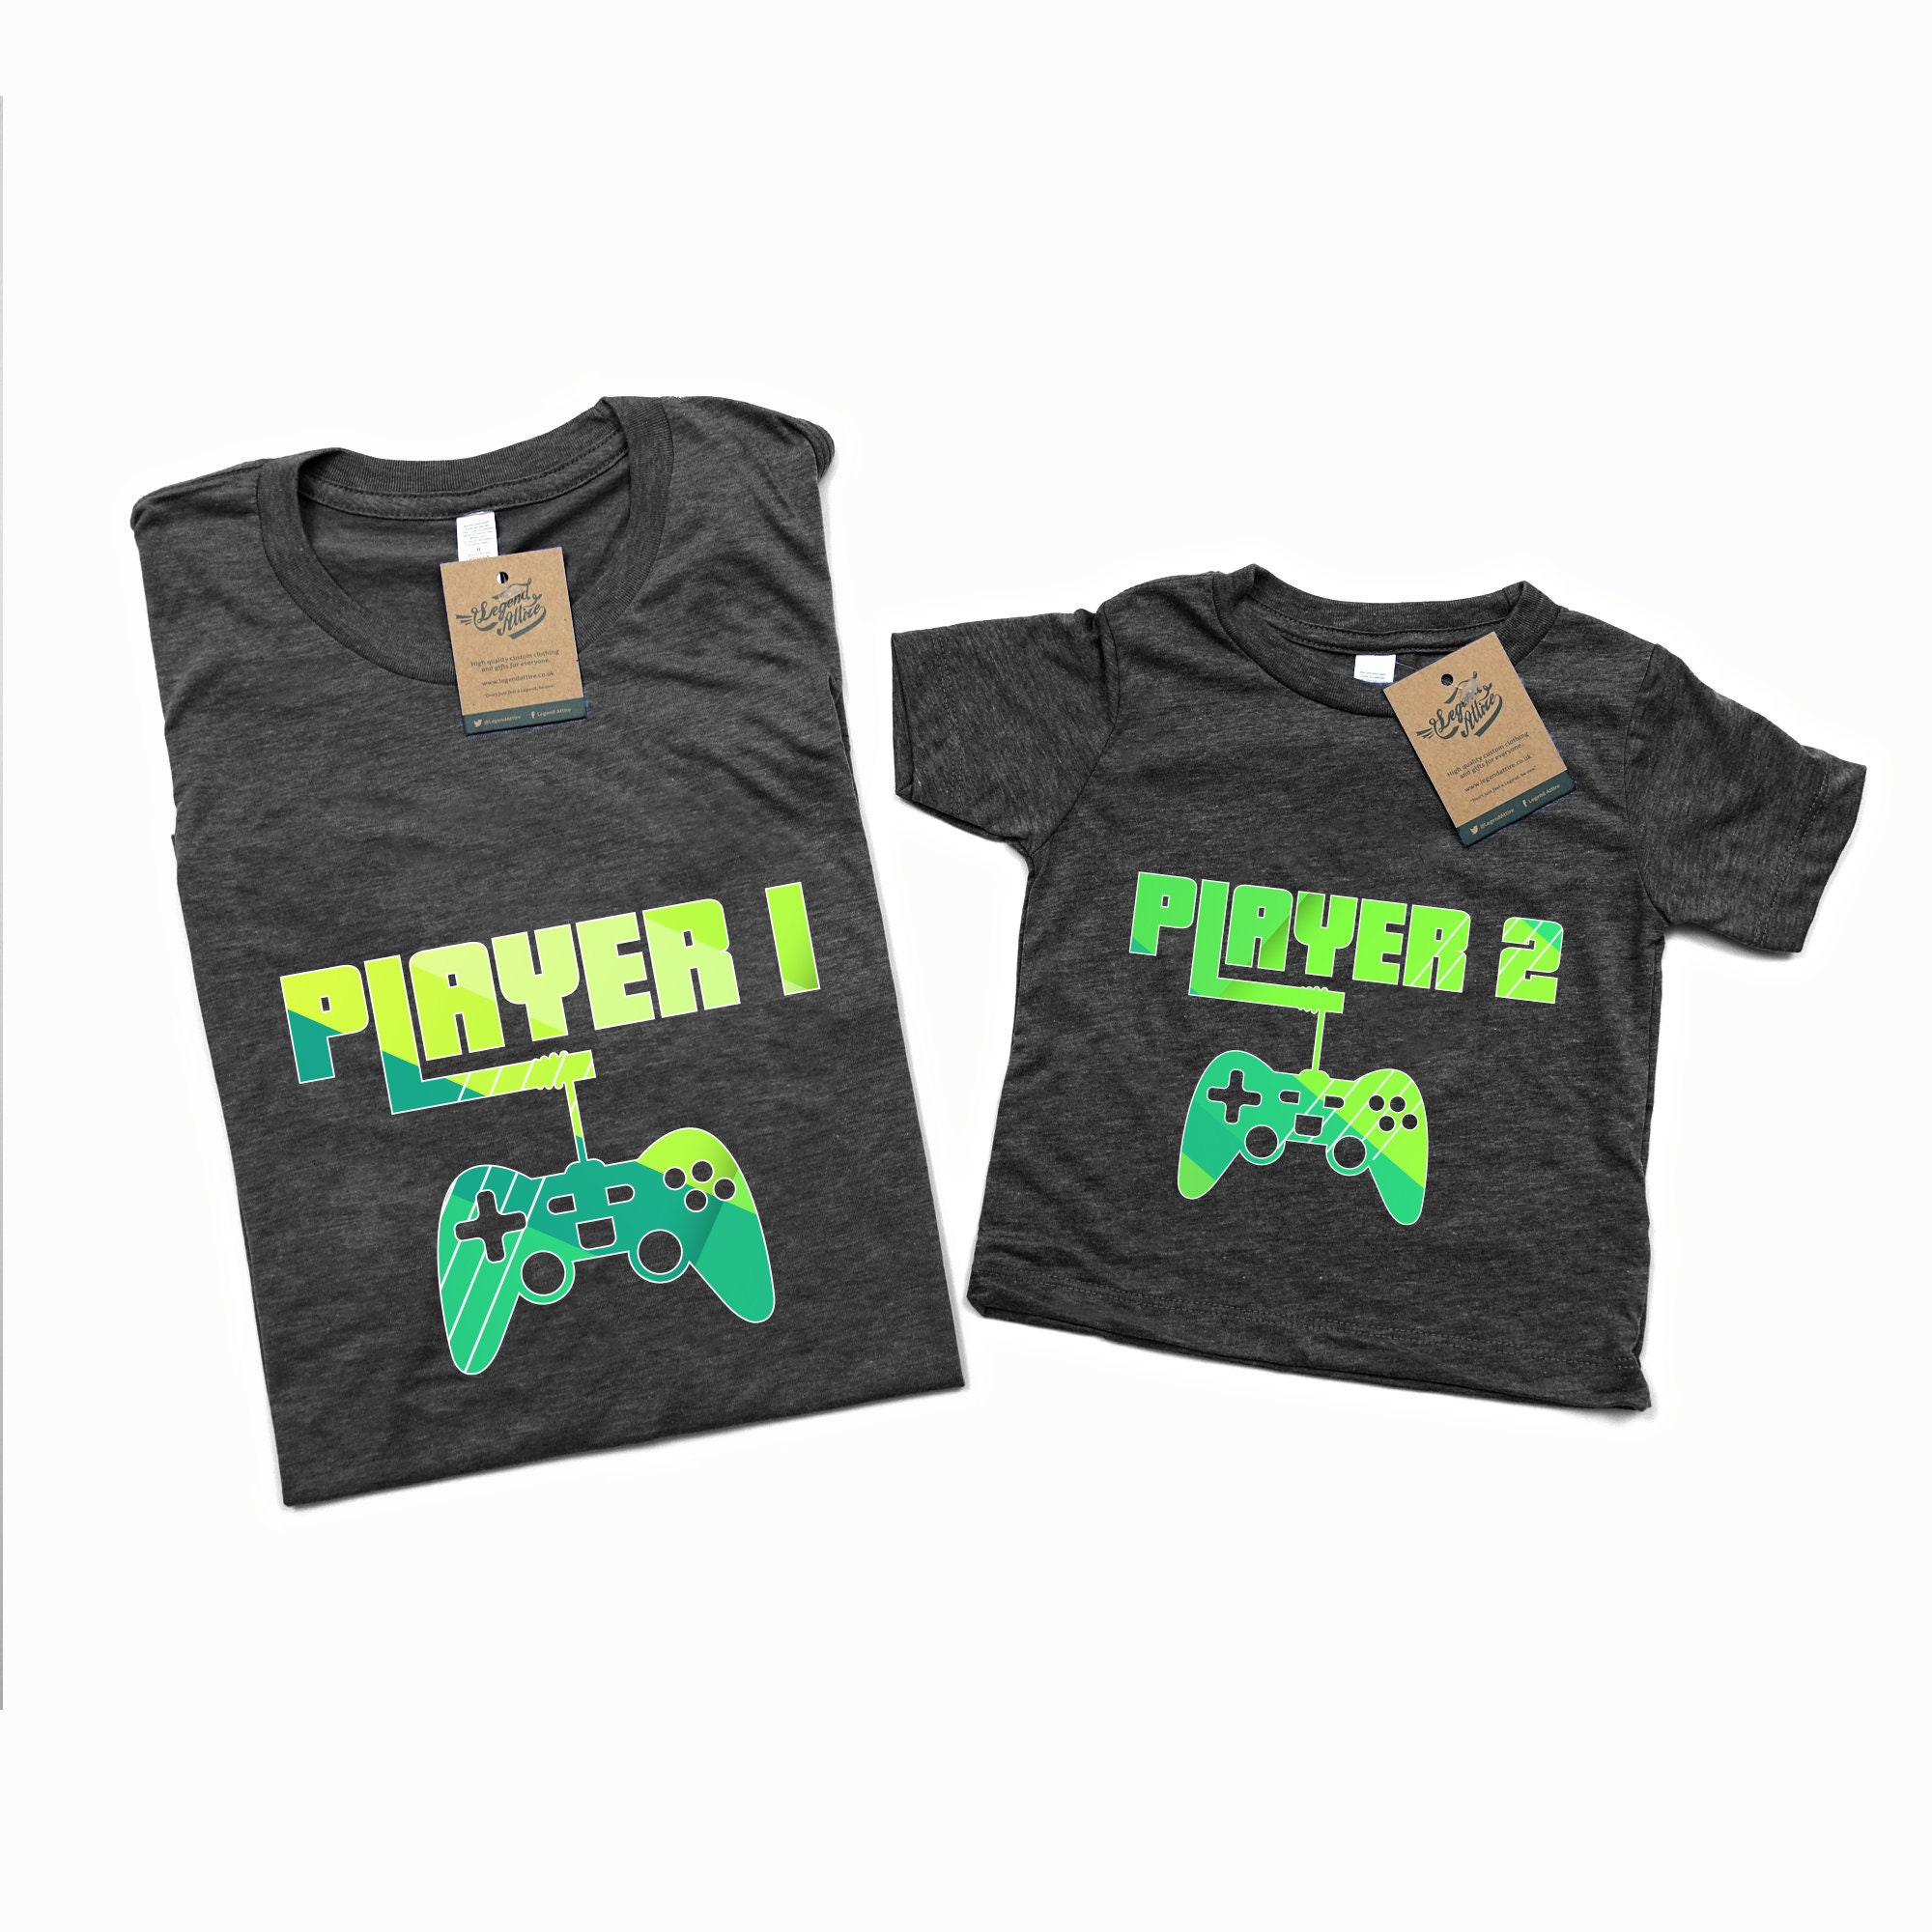 NEW Player 1 And Player 2 Full Colour T-shirt Set Gift For | Etsy